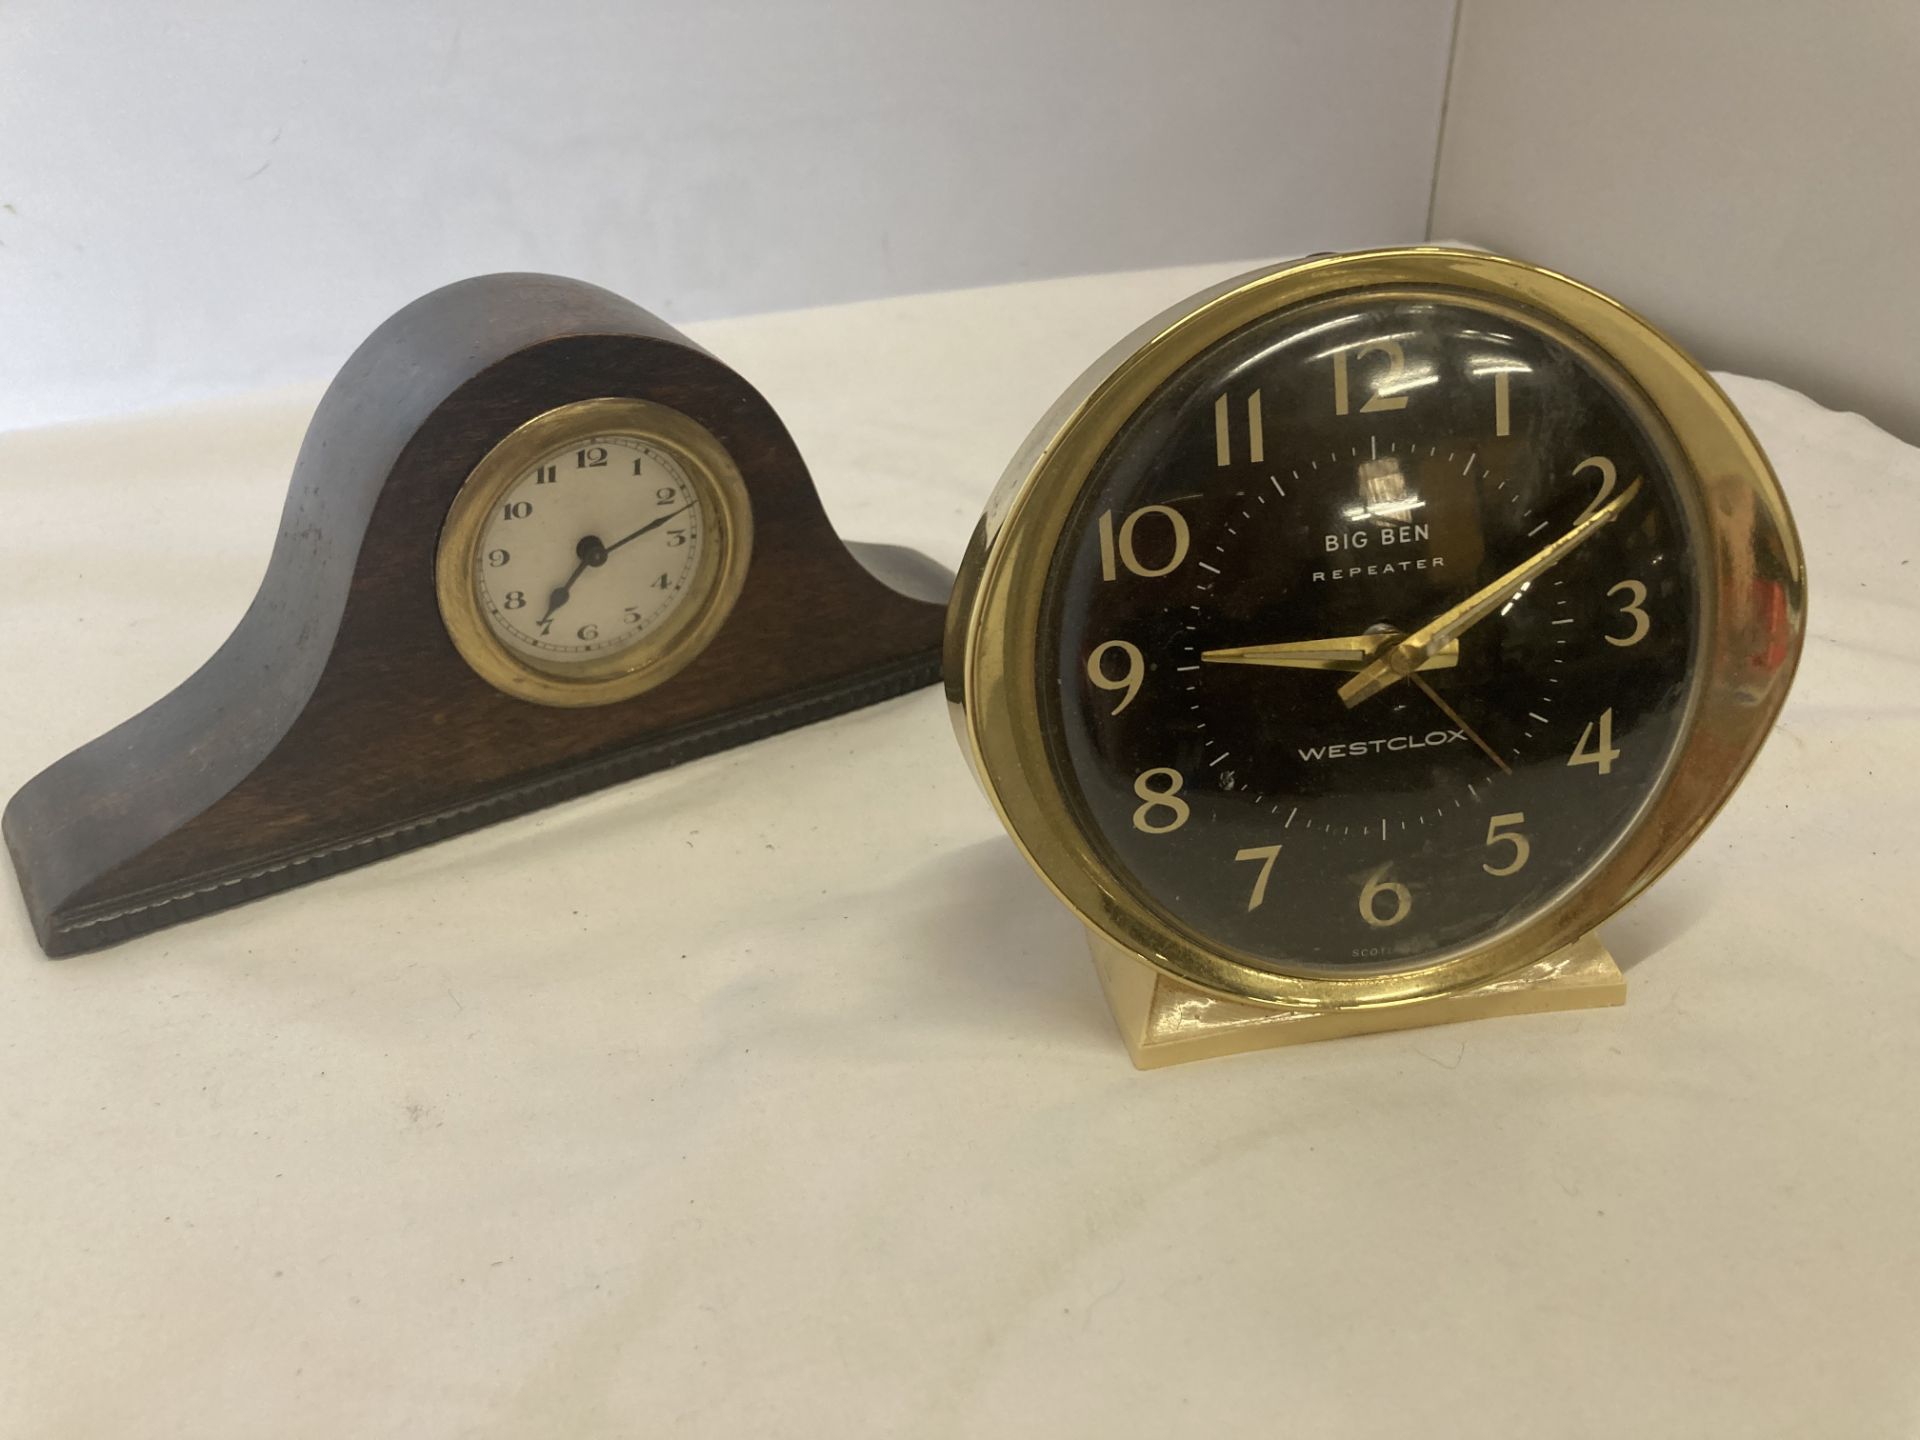 TWO MAHOGANY CASED WALL CLOCKS, A WESTCLOX 'BIG BEN' ALARM CLOCK, A SMITHS VINTAGE ELECTRIC MANTLE - Image 9 of 21